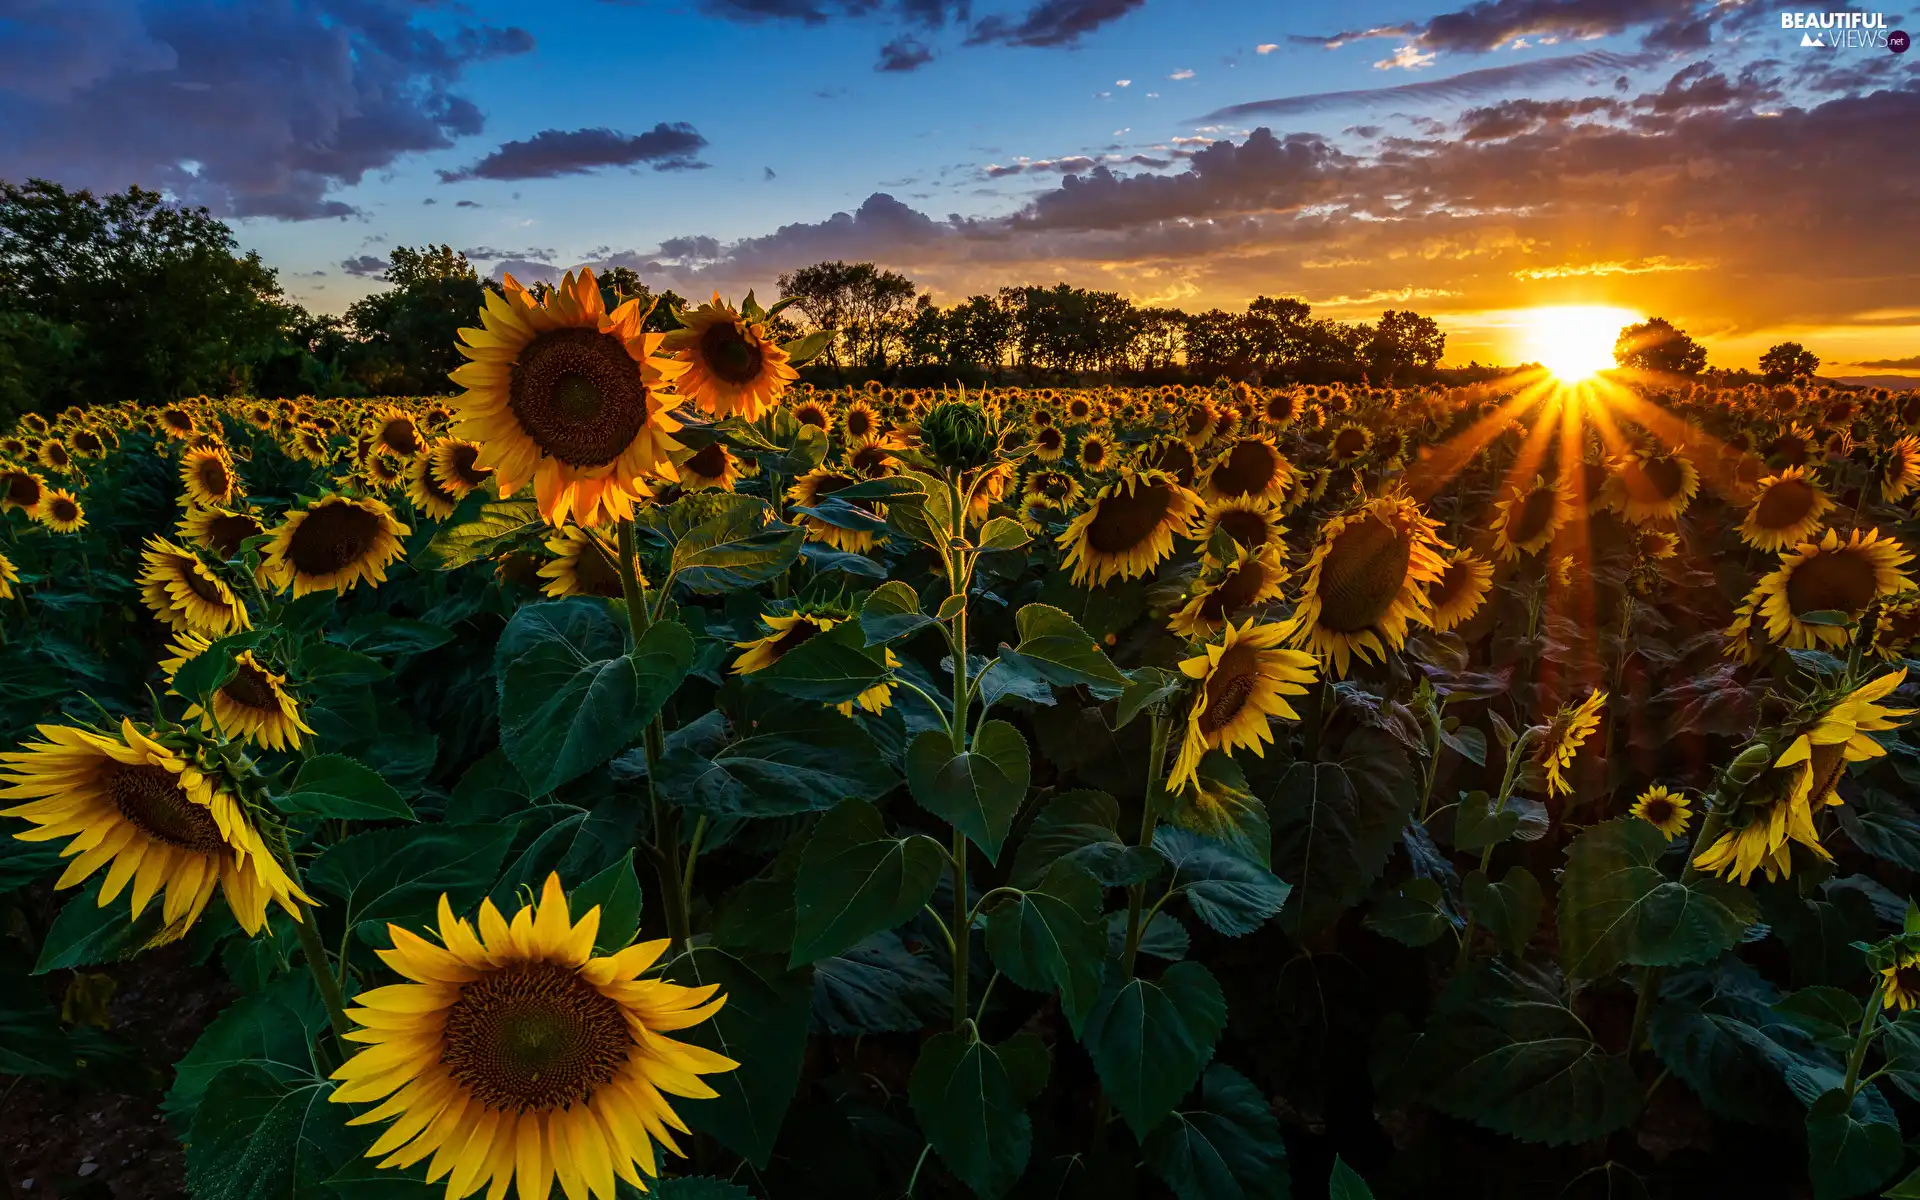 Great Sunsets, Field, viewes, clouds, trees, Nice sunflowers